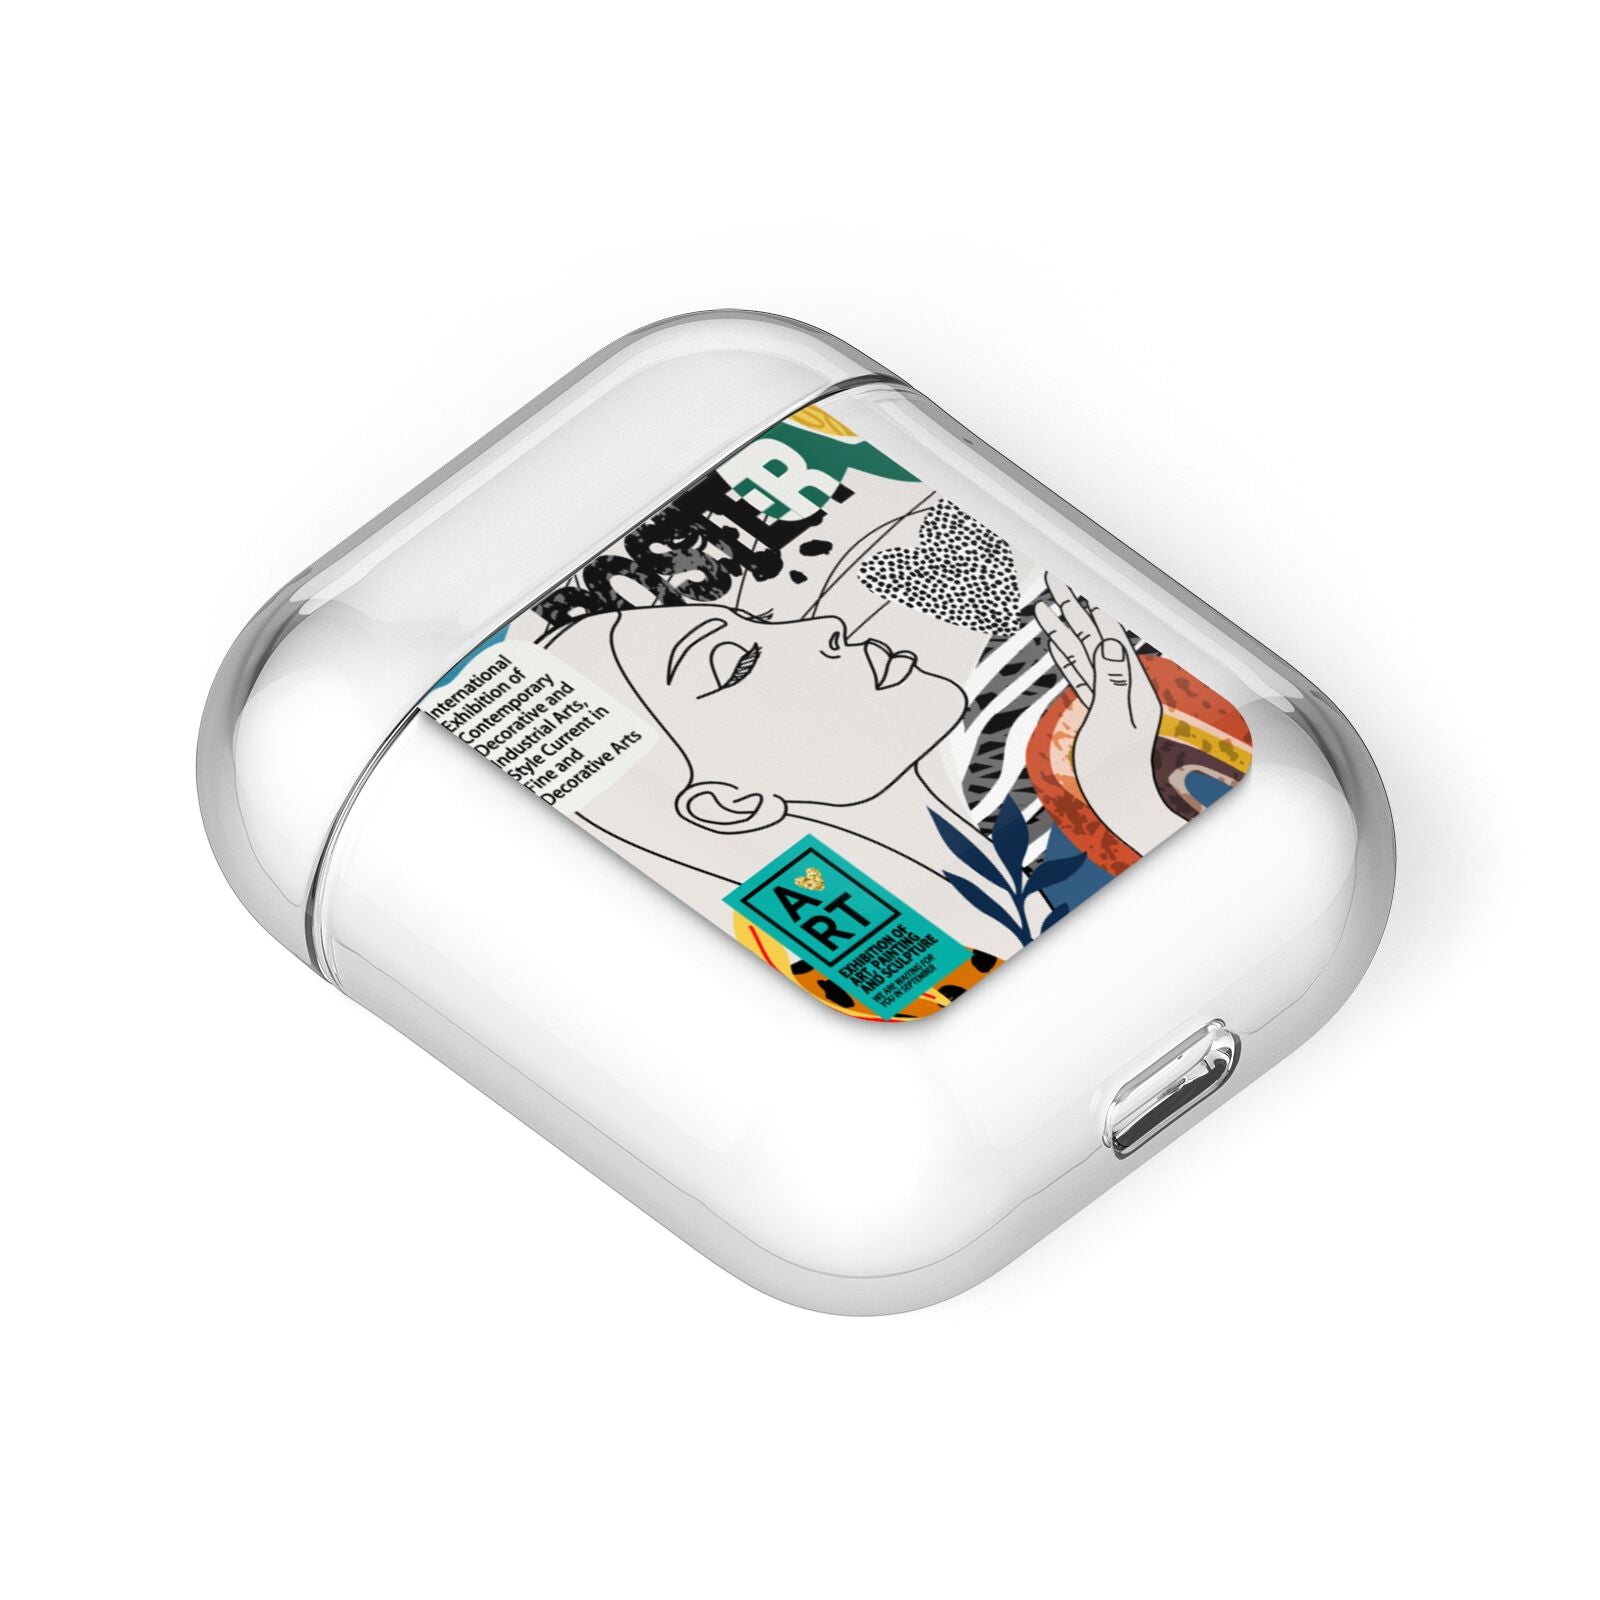 Abstract Art Poster AirPods Case Laid Flat